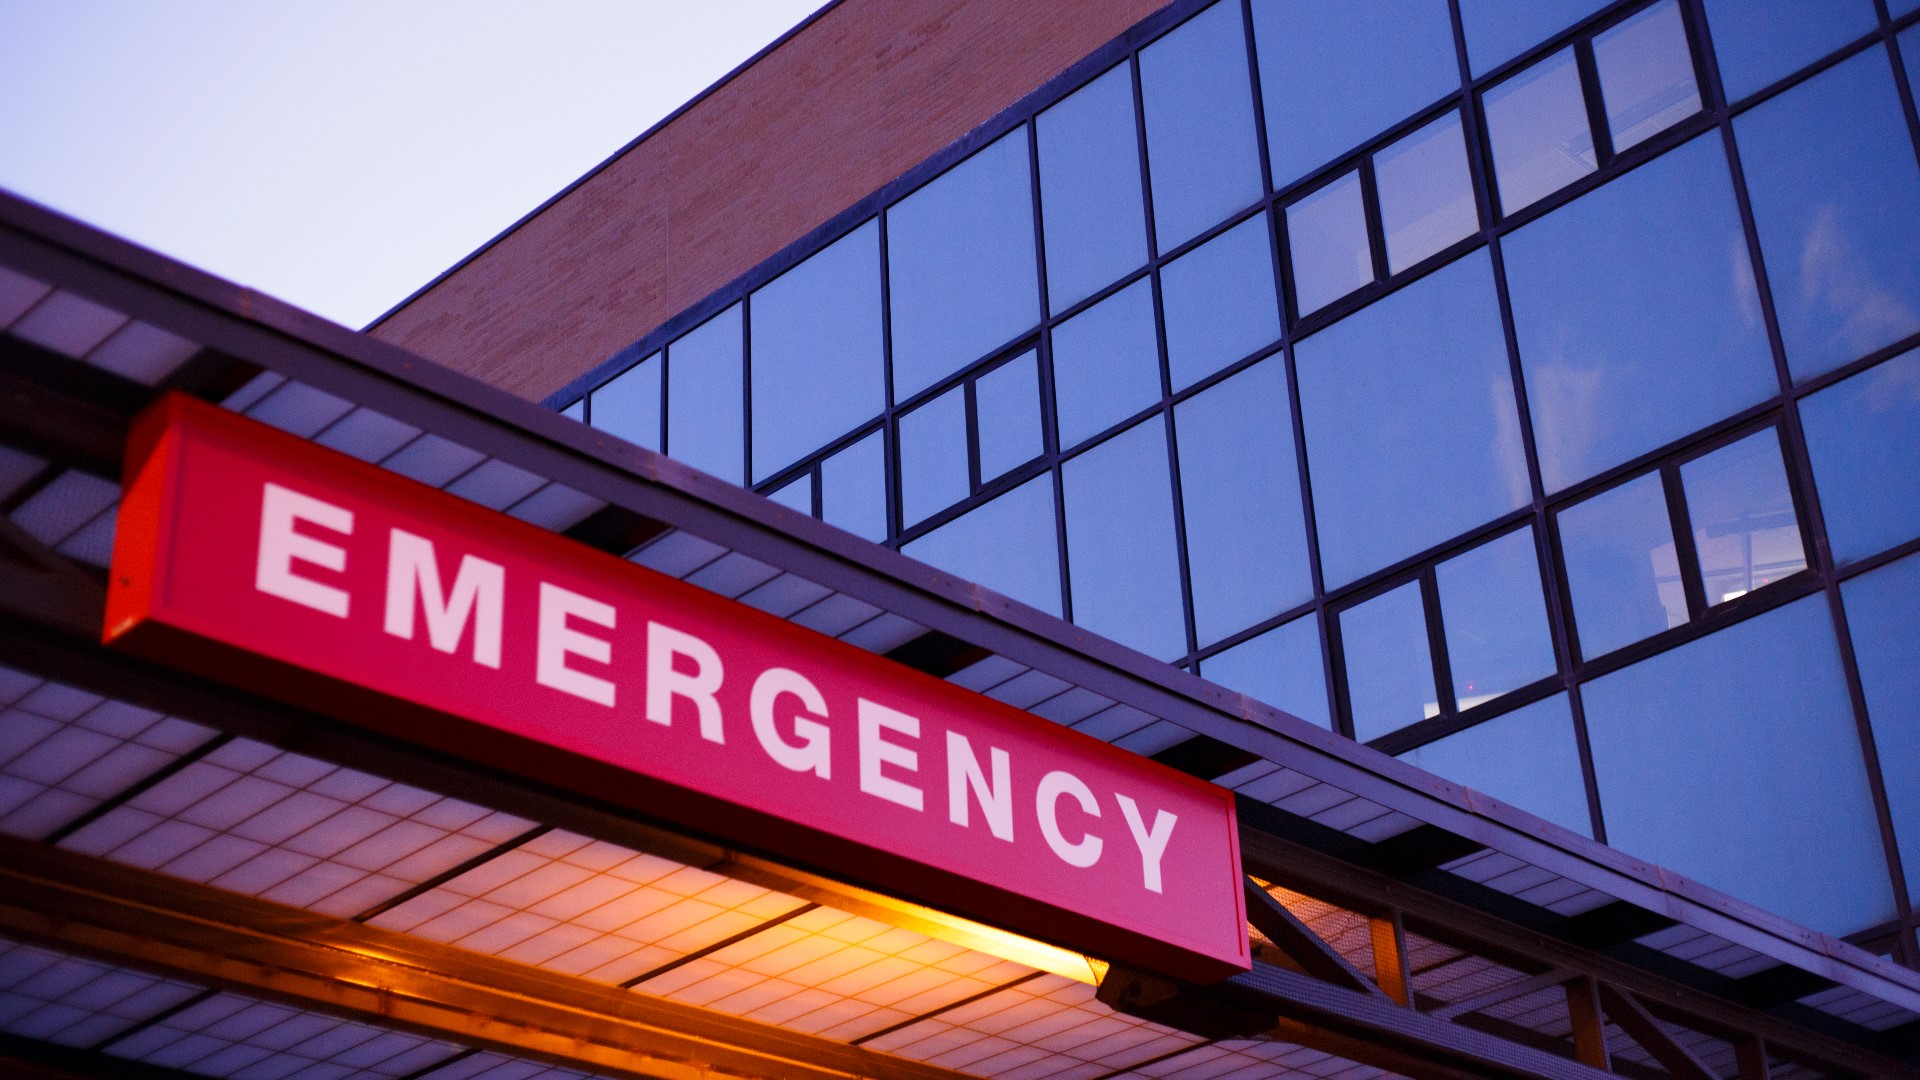 Hospitals ask community members that are ill to refrain from visiting at this time.